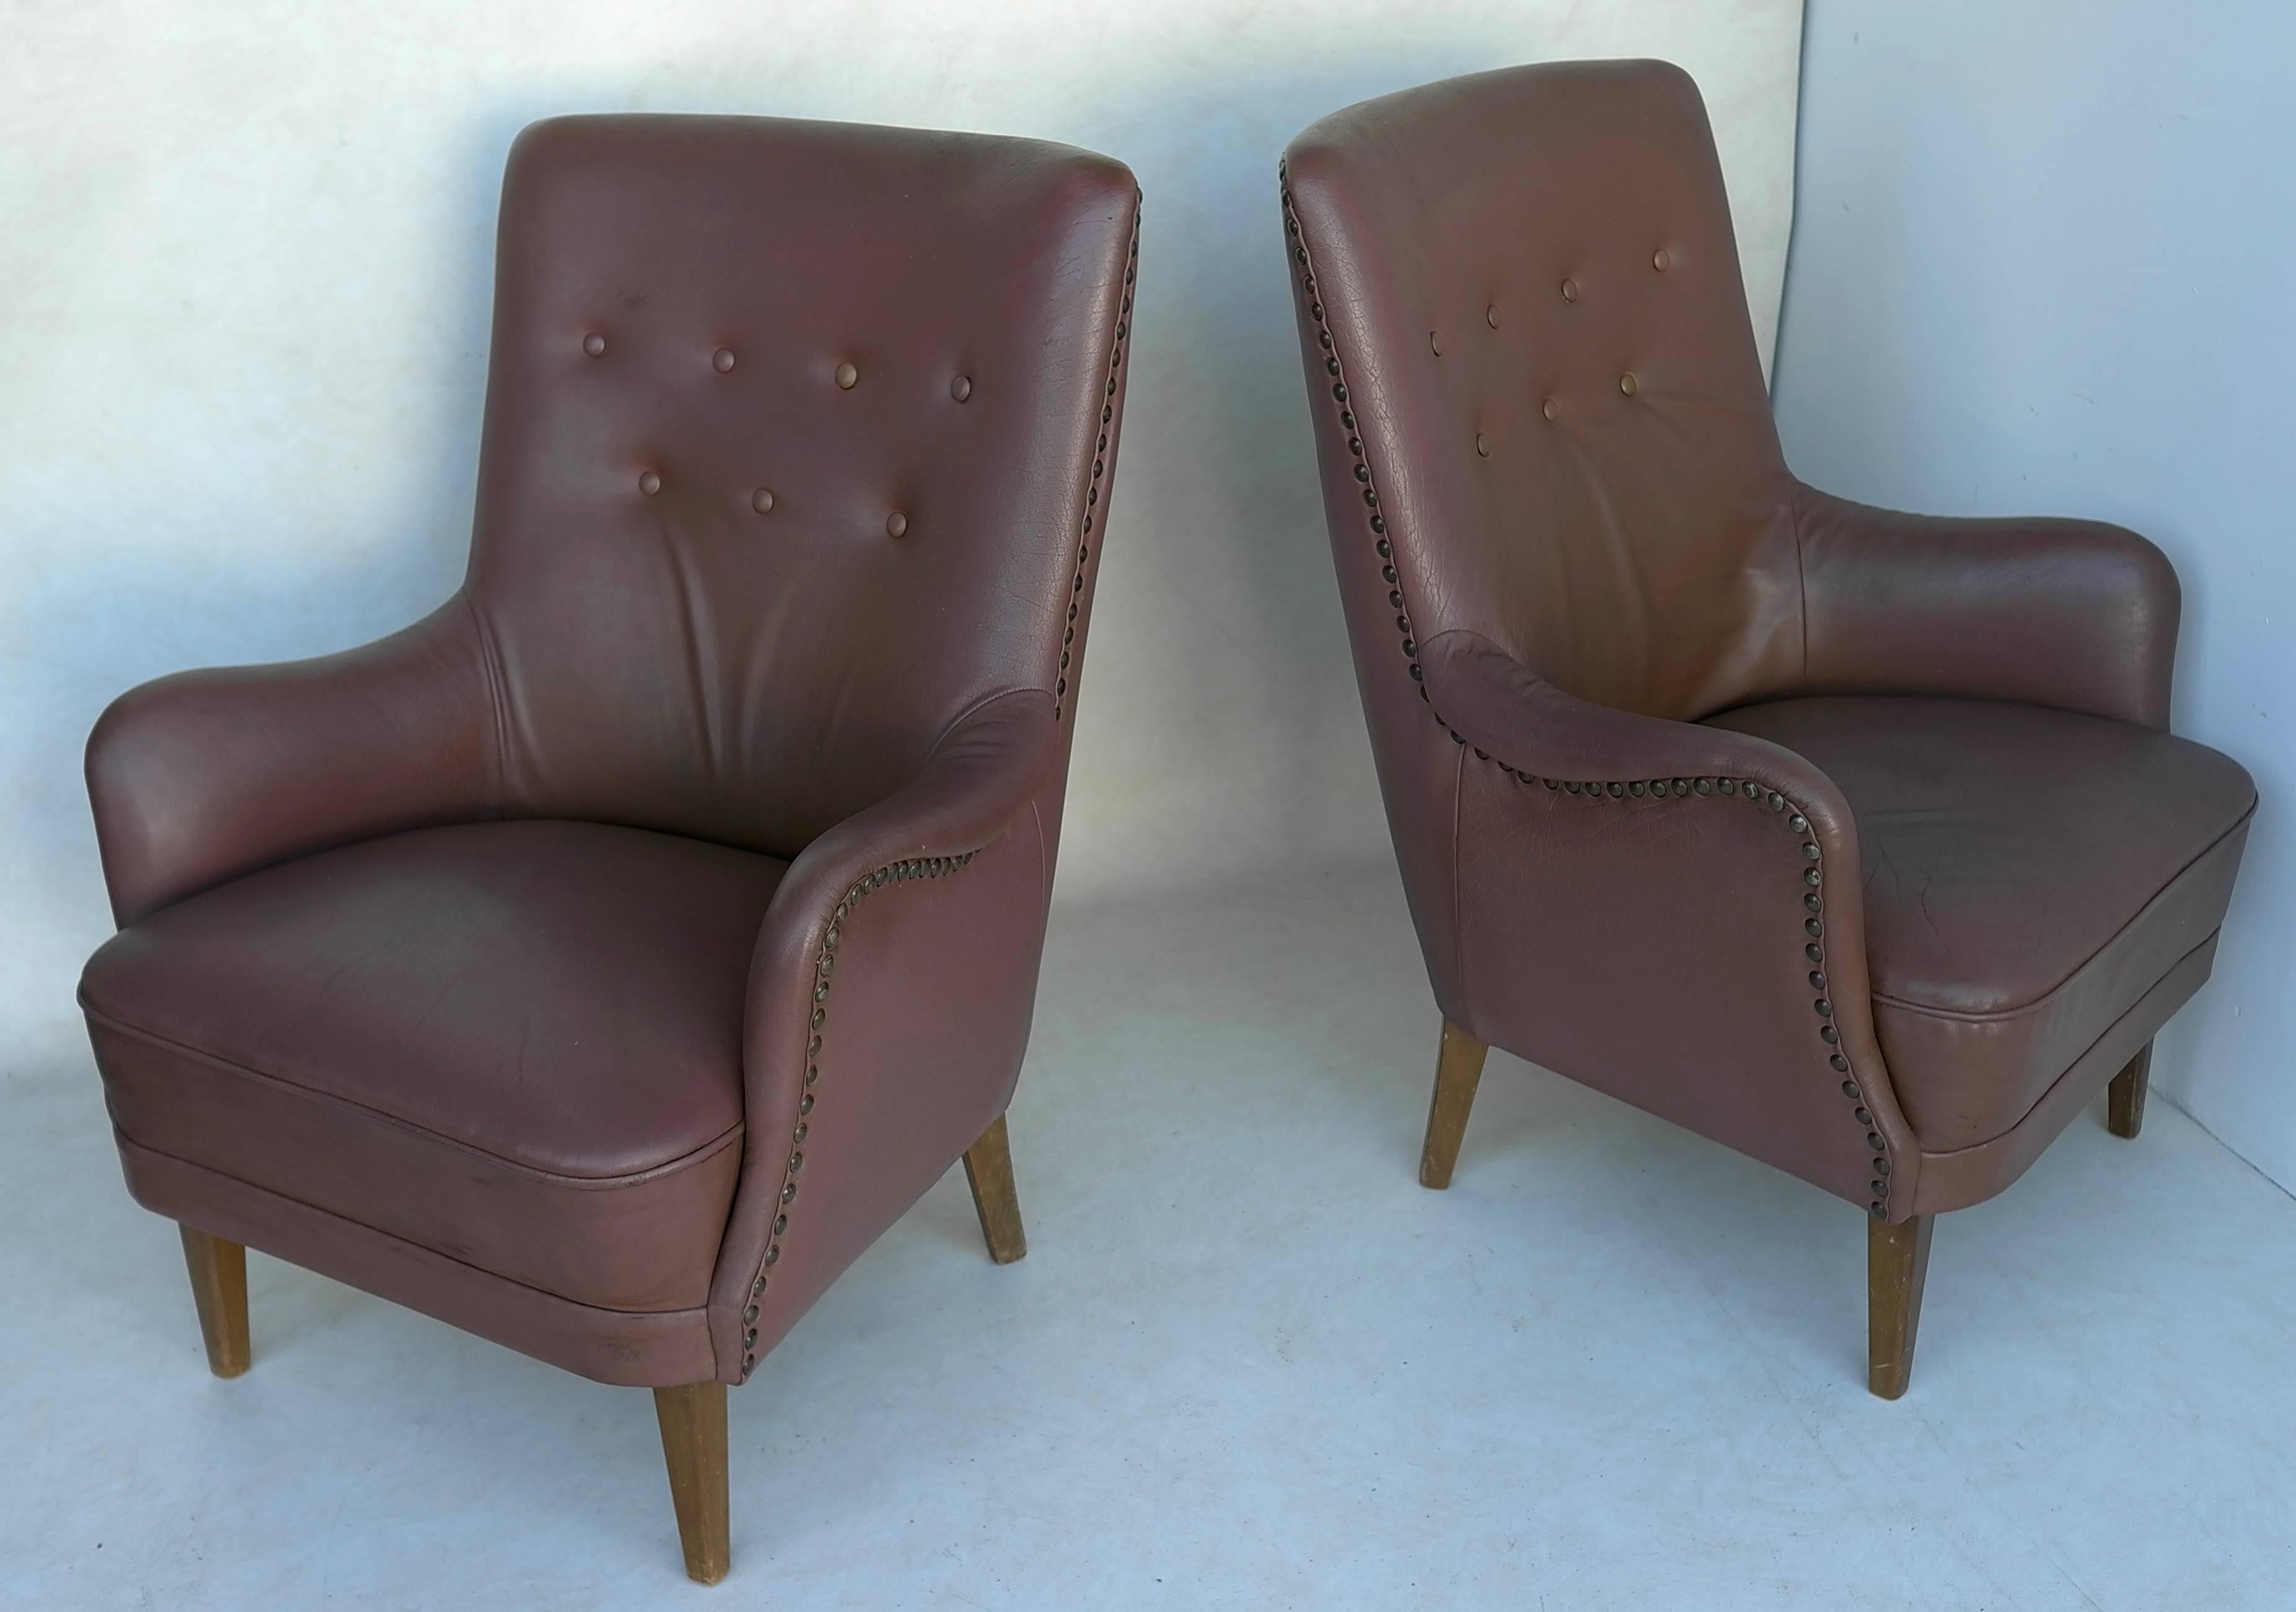 20th Century Pair of Danish High Back Armchairs in Brown Leather in style of Arne Vodder